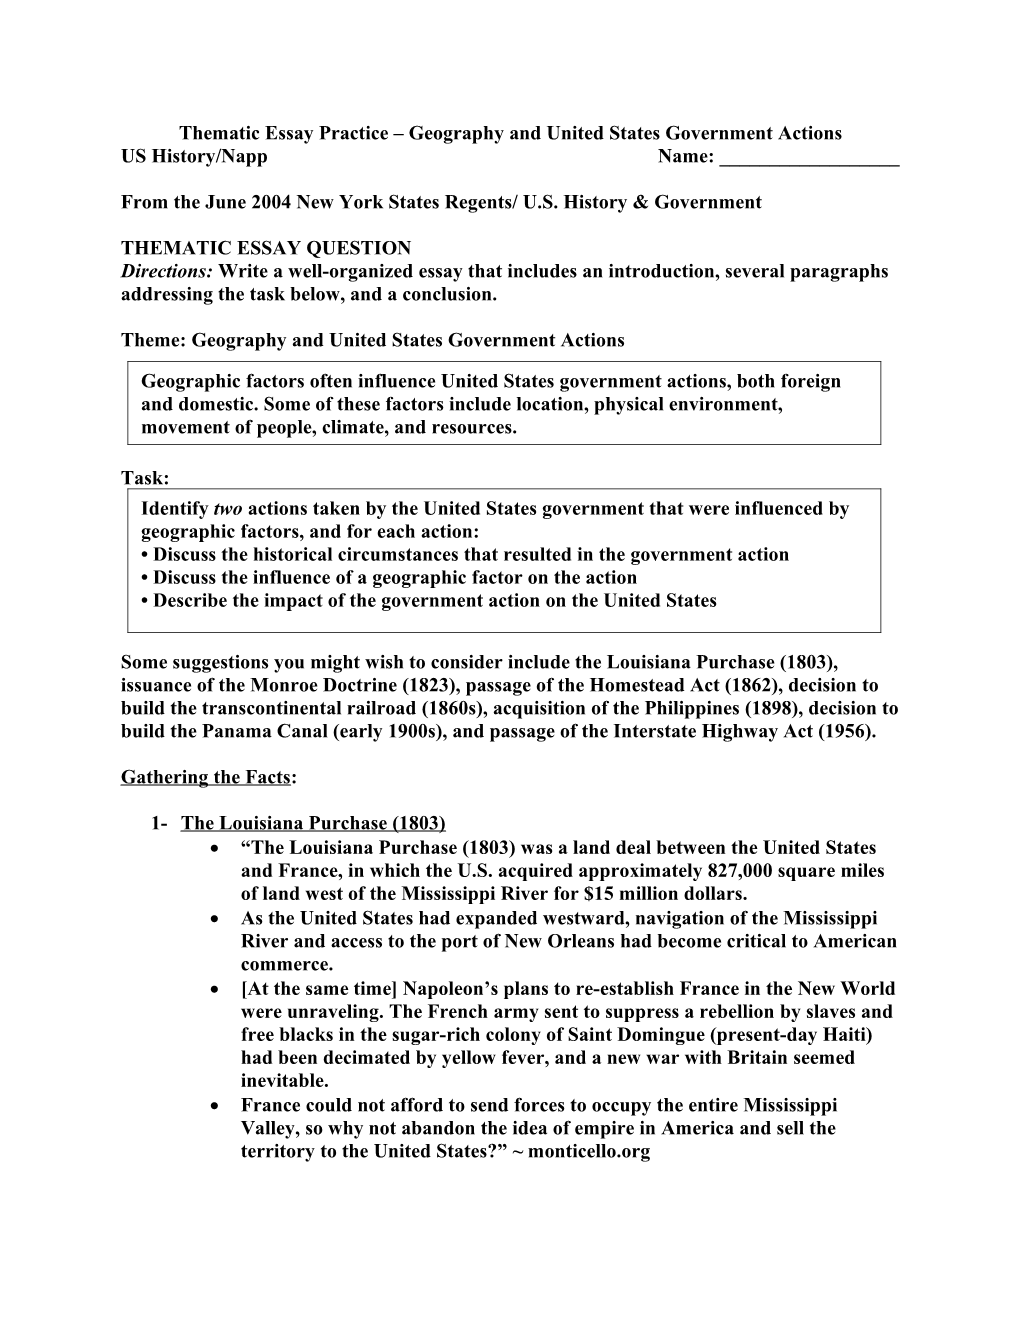 Thematic Essay Practice Geography and United States Government Actions